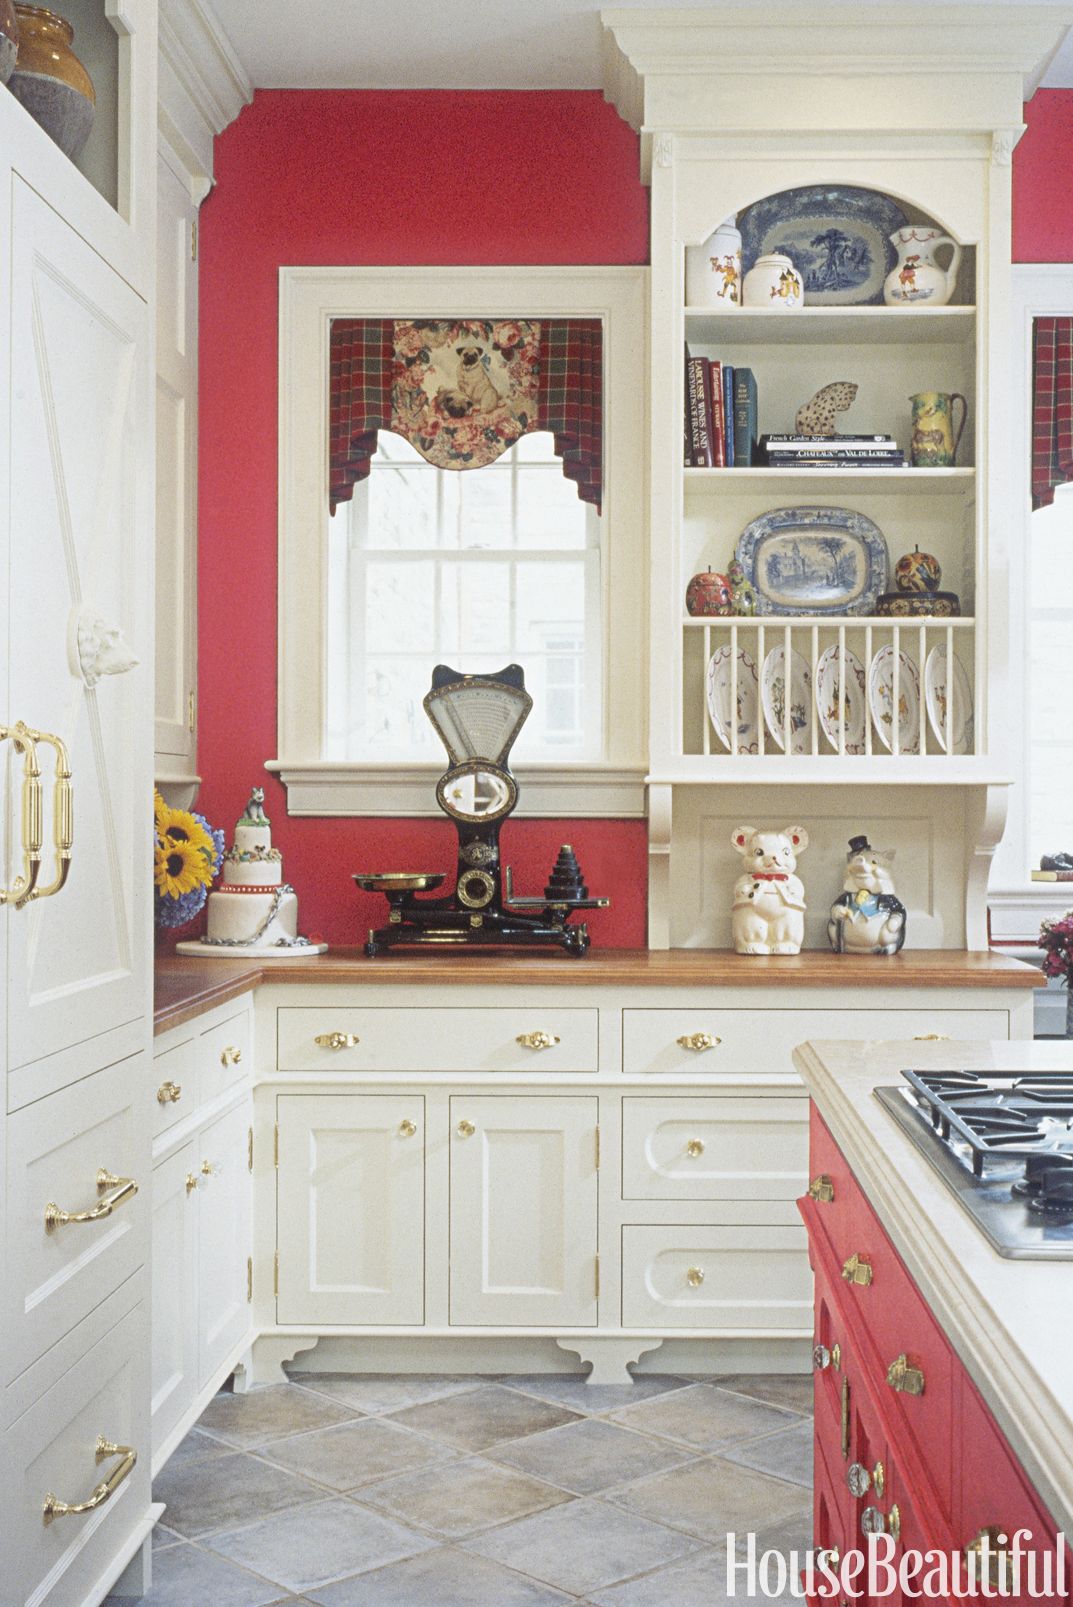 Simple Images Of Red Kitchens with Simple Decor